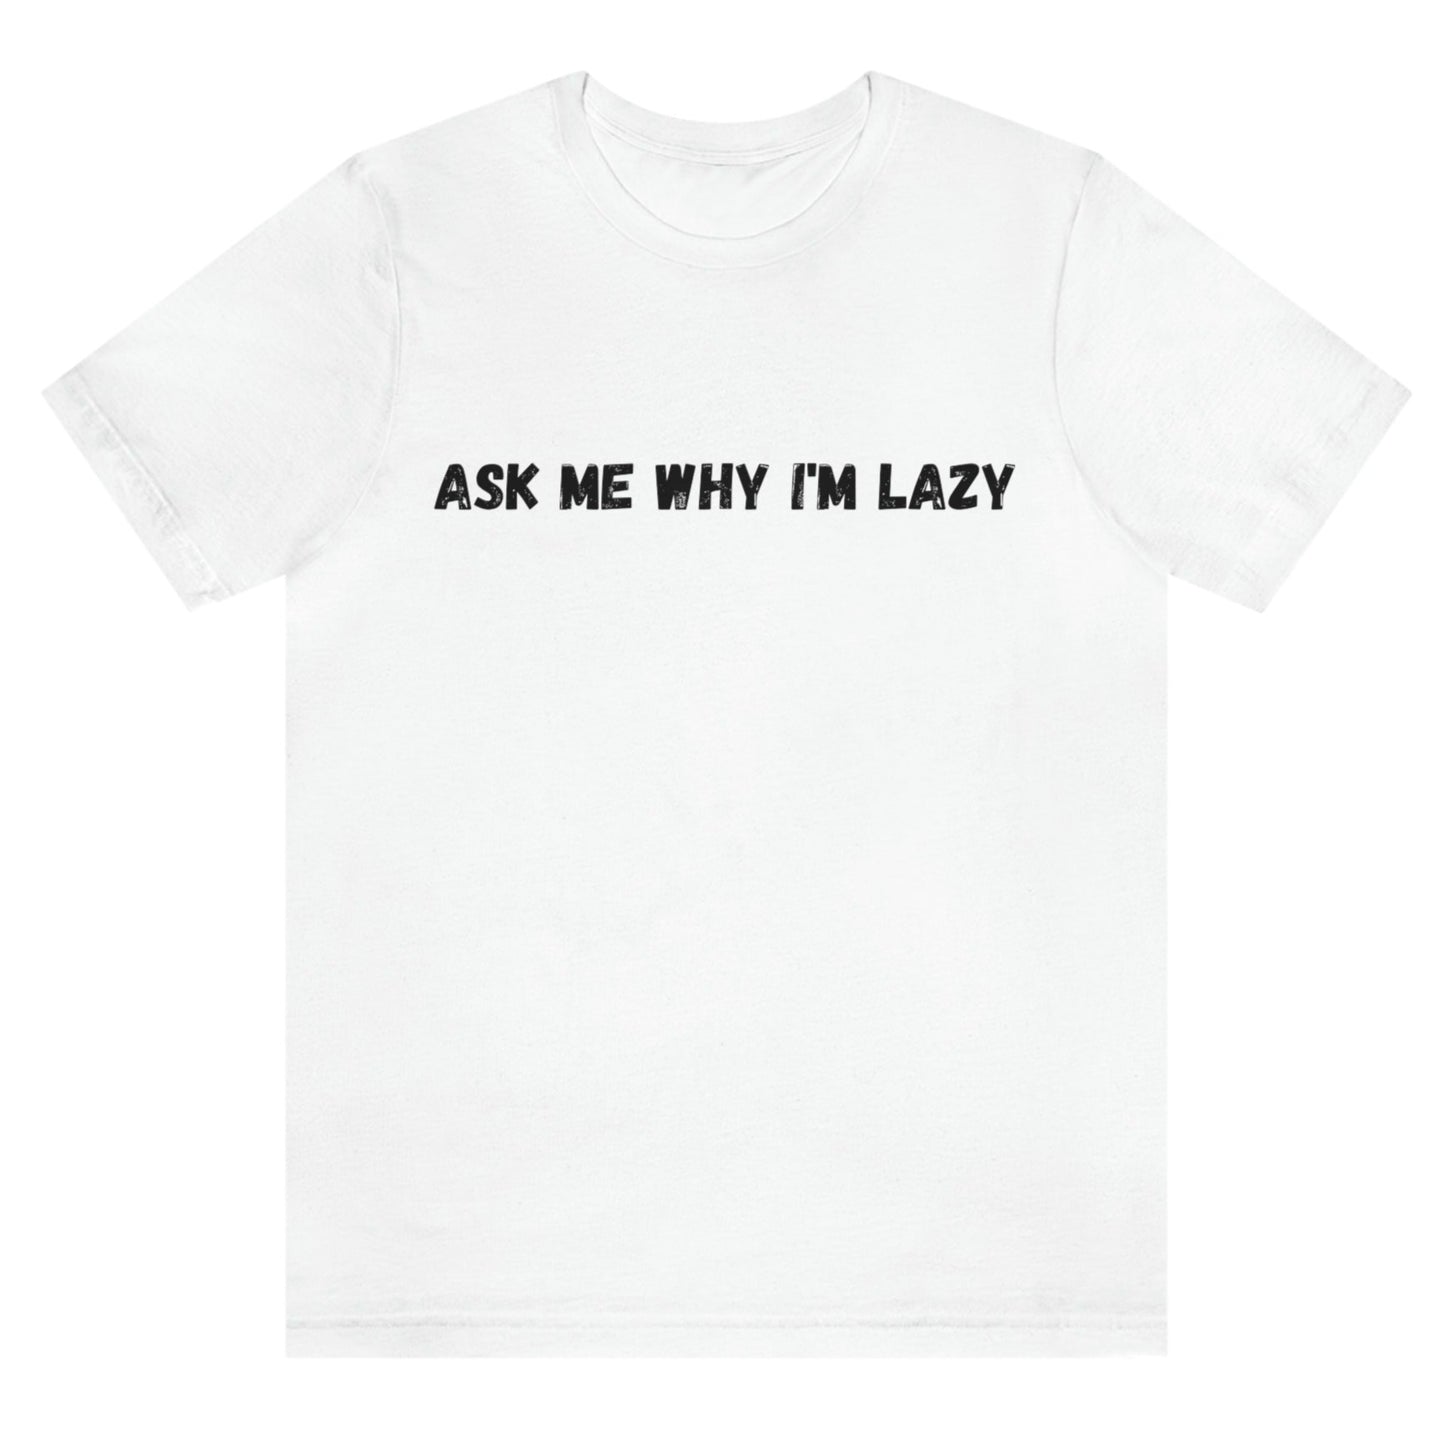 ask-me-why-im-lazy-white-t-shirt-unisex-funny